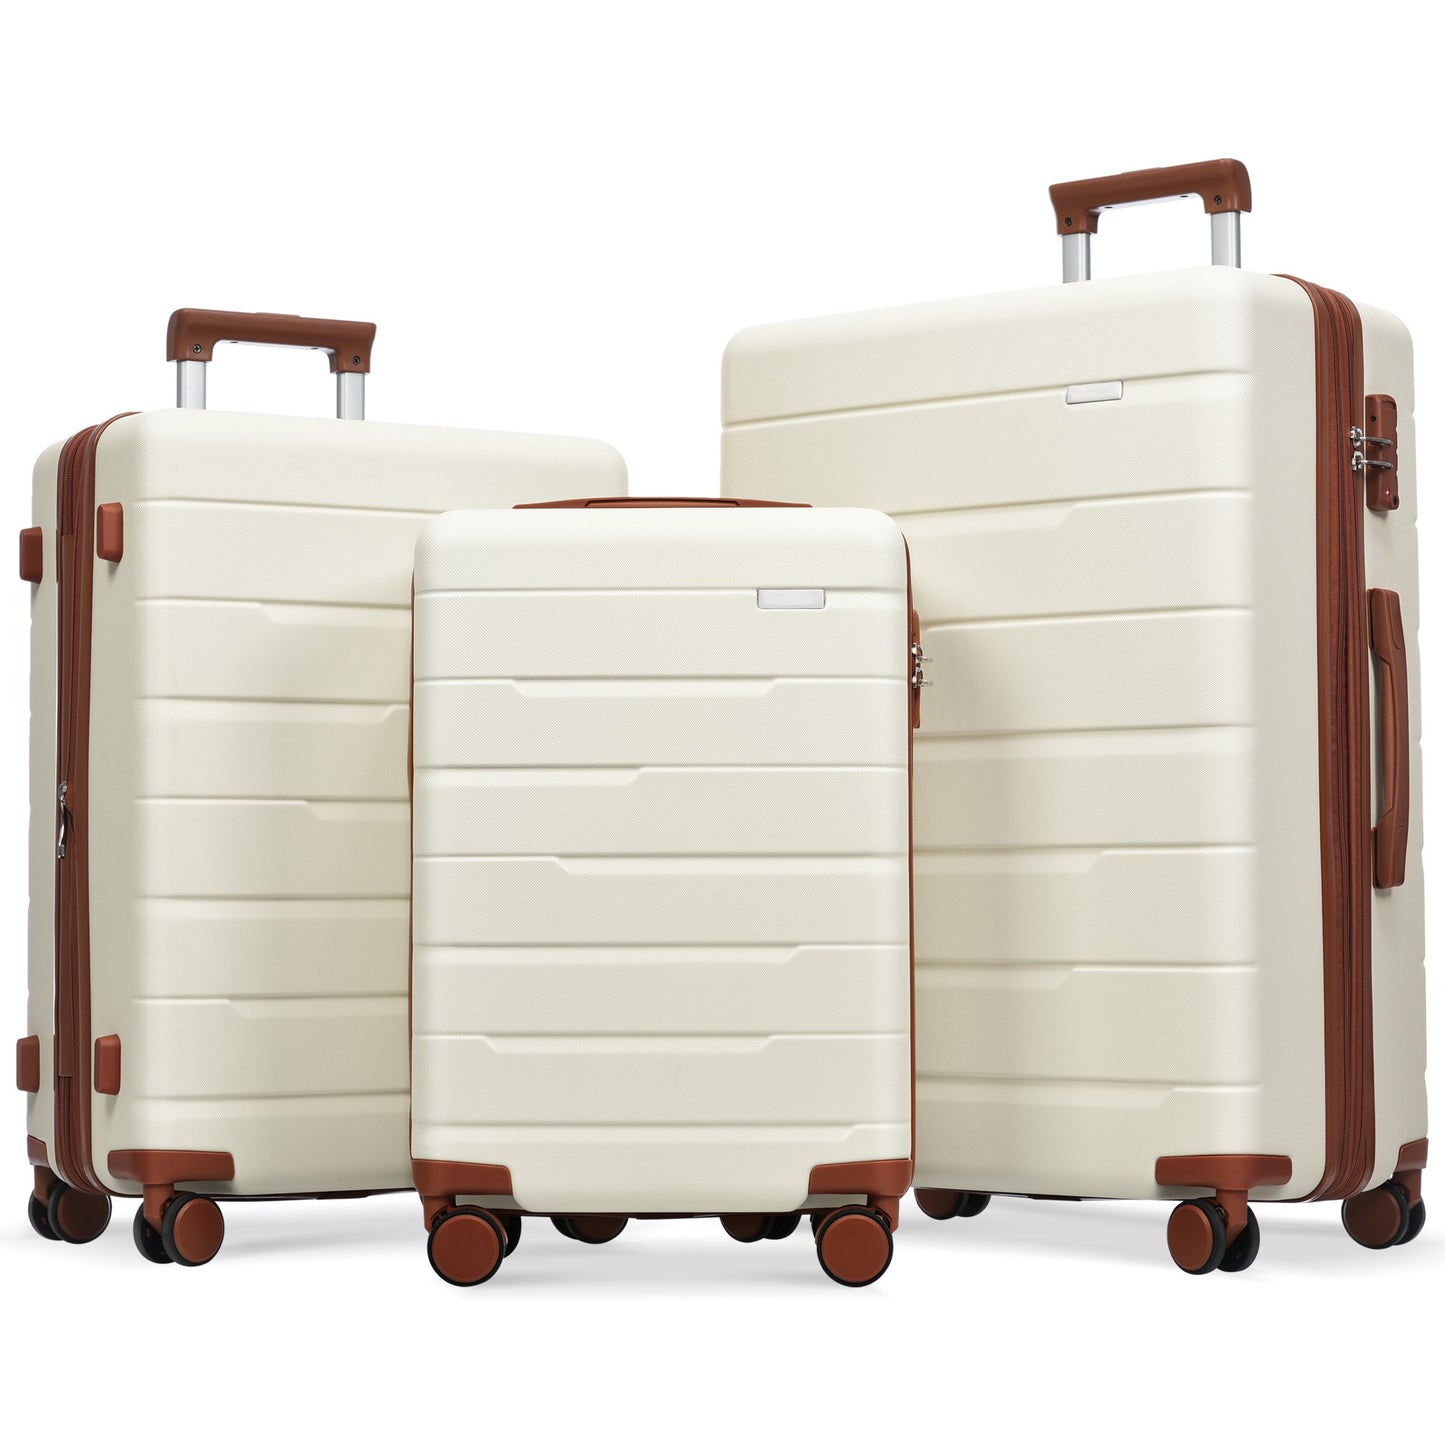 Luggage Sets 3 Piece Suitcase Set 20/24/28 Carry on Luggage Airline Approved Hard Case with Spinner Wheels Beige and Brown